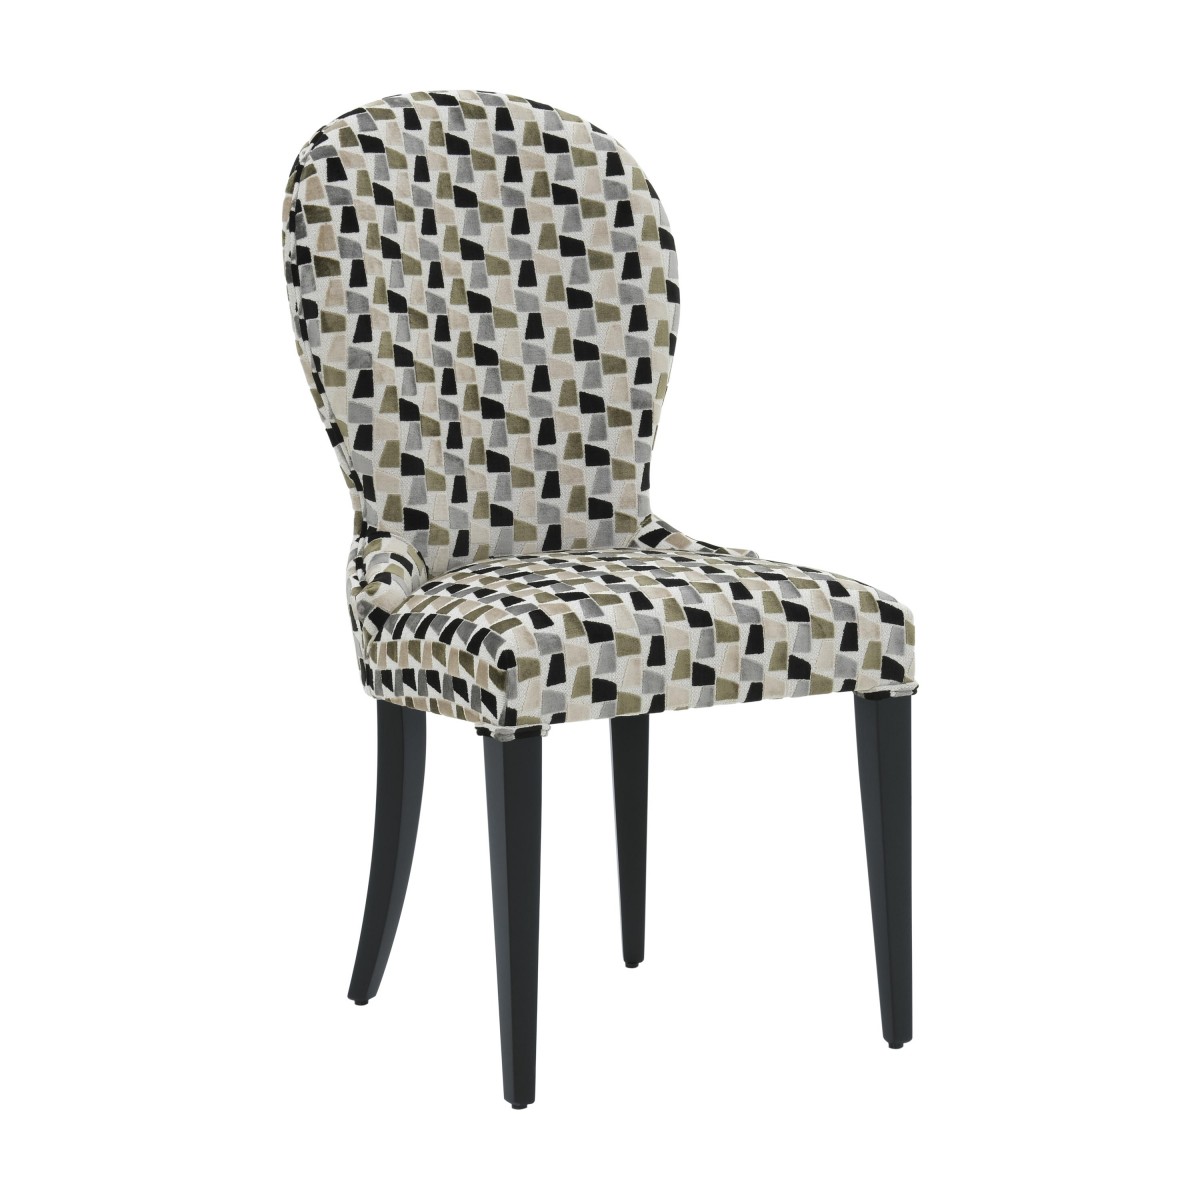 Contemporary replica chair Calipso by Sevensedie - solid beech wood frame -  fully upholstered back - upholstered in a soft grey velvet - legs lacquered in spring grey finish - trimmed with silver nails 